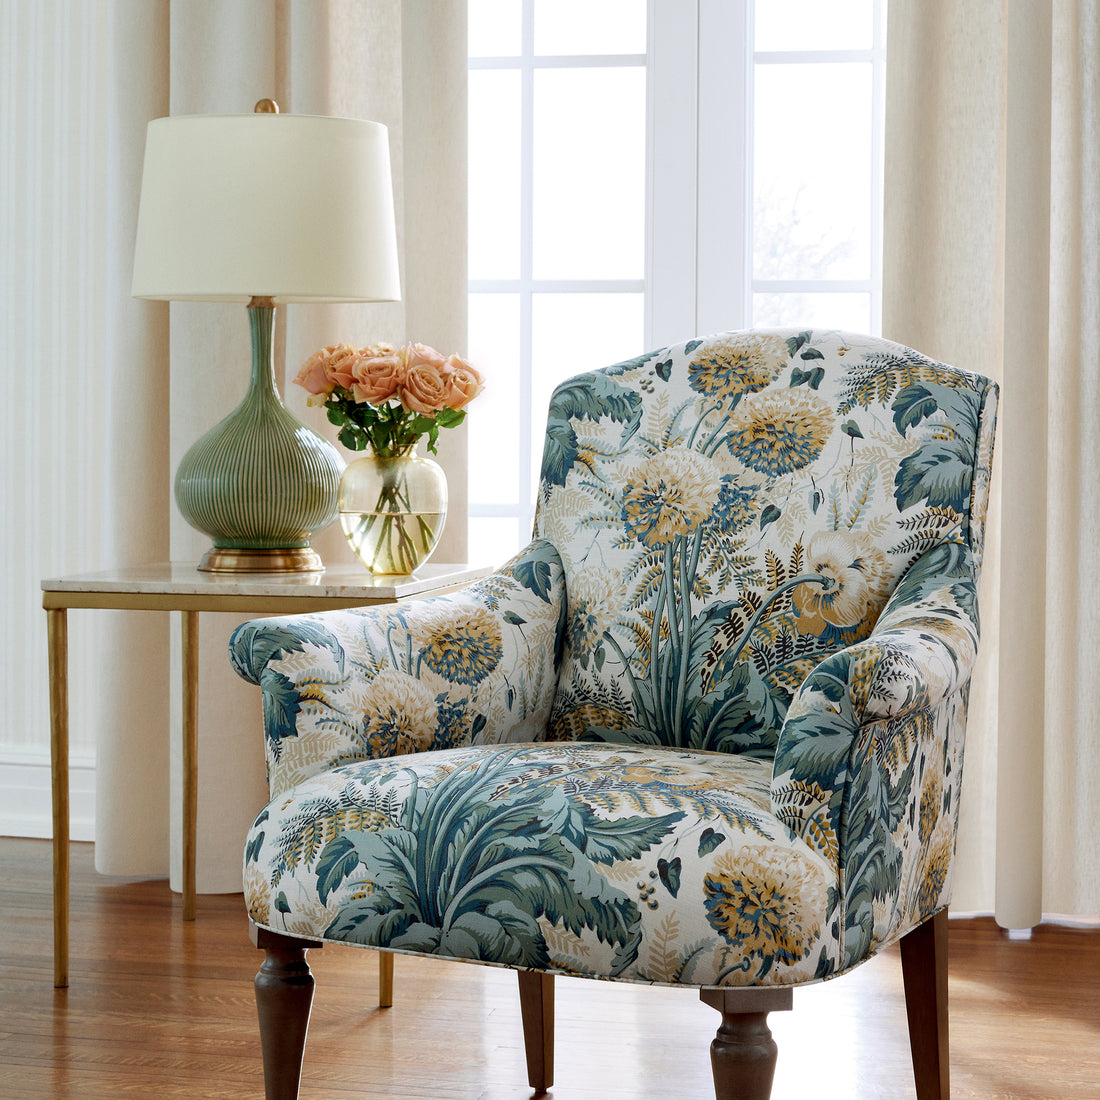 Pembroke Chair in Dahlia printed fabric in Soft Gold on Cream, Anna French pattern number AF24539